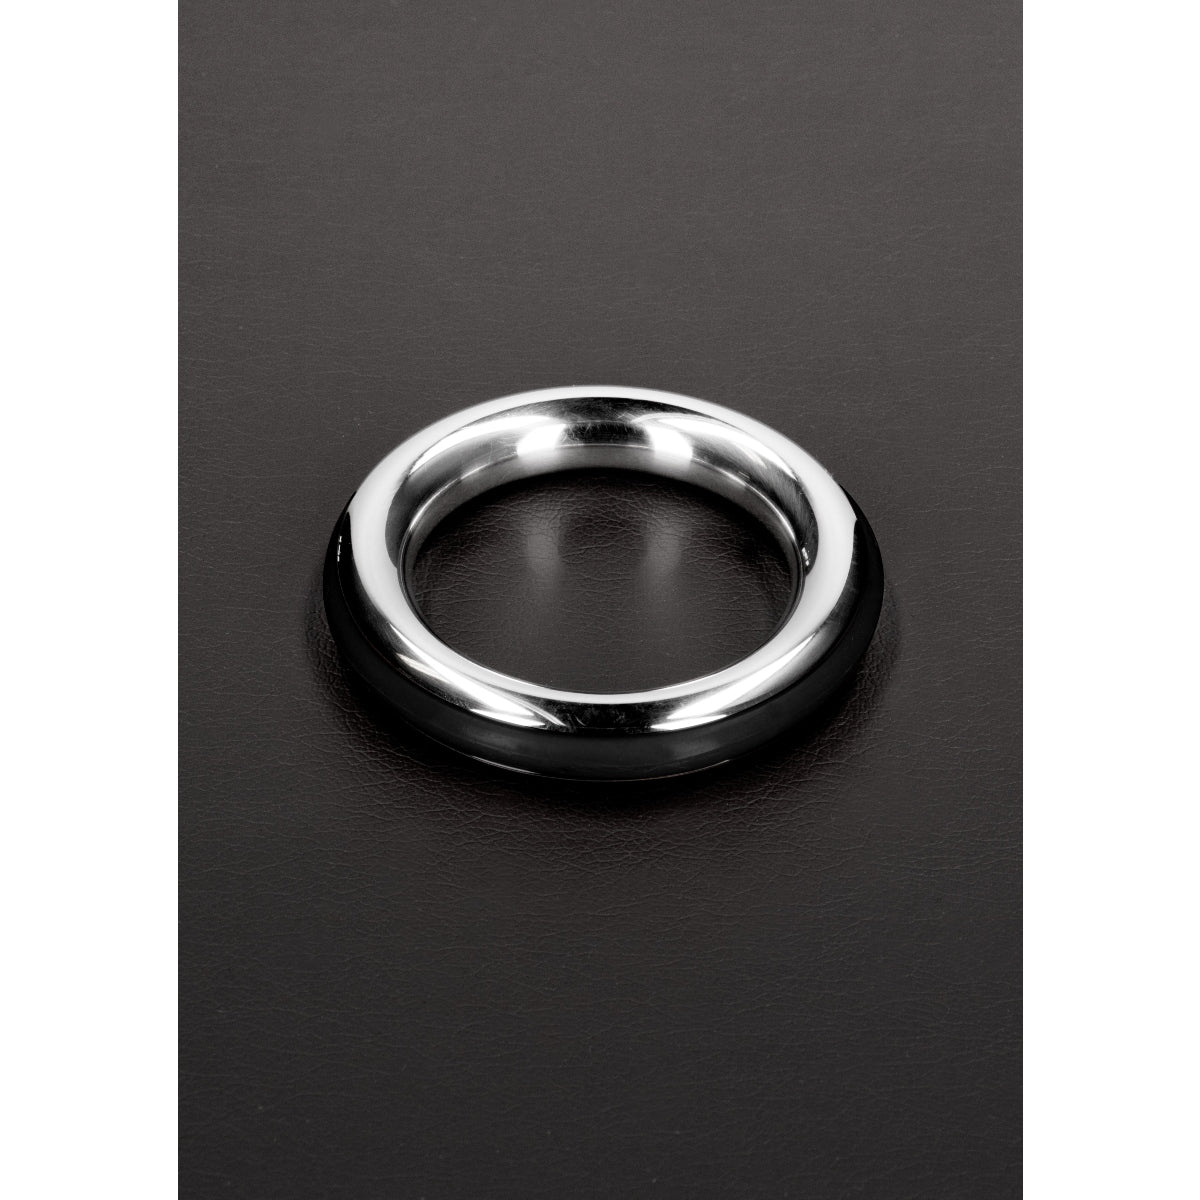 Shots Cazzo Tensions Stainless Steel Cock Ring Black 40mm (8131771629807)